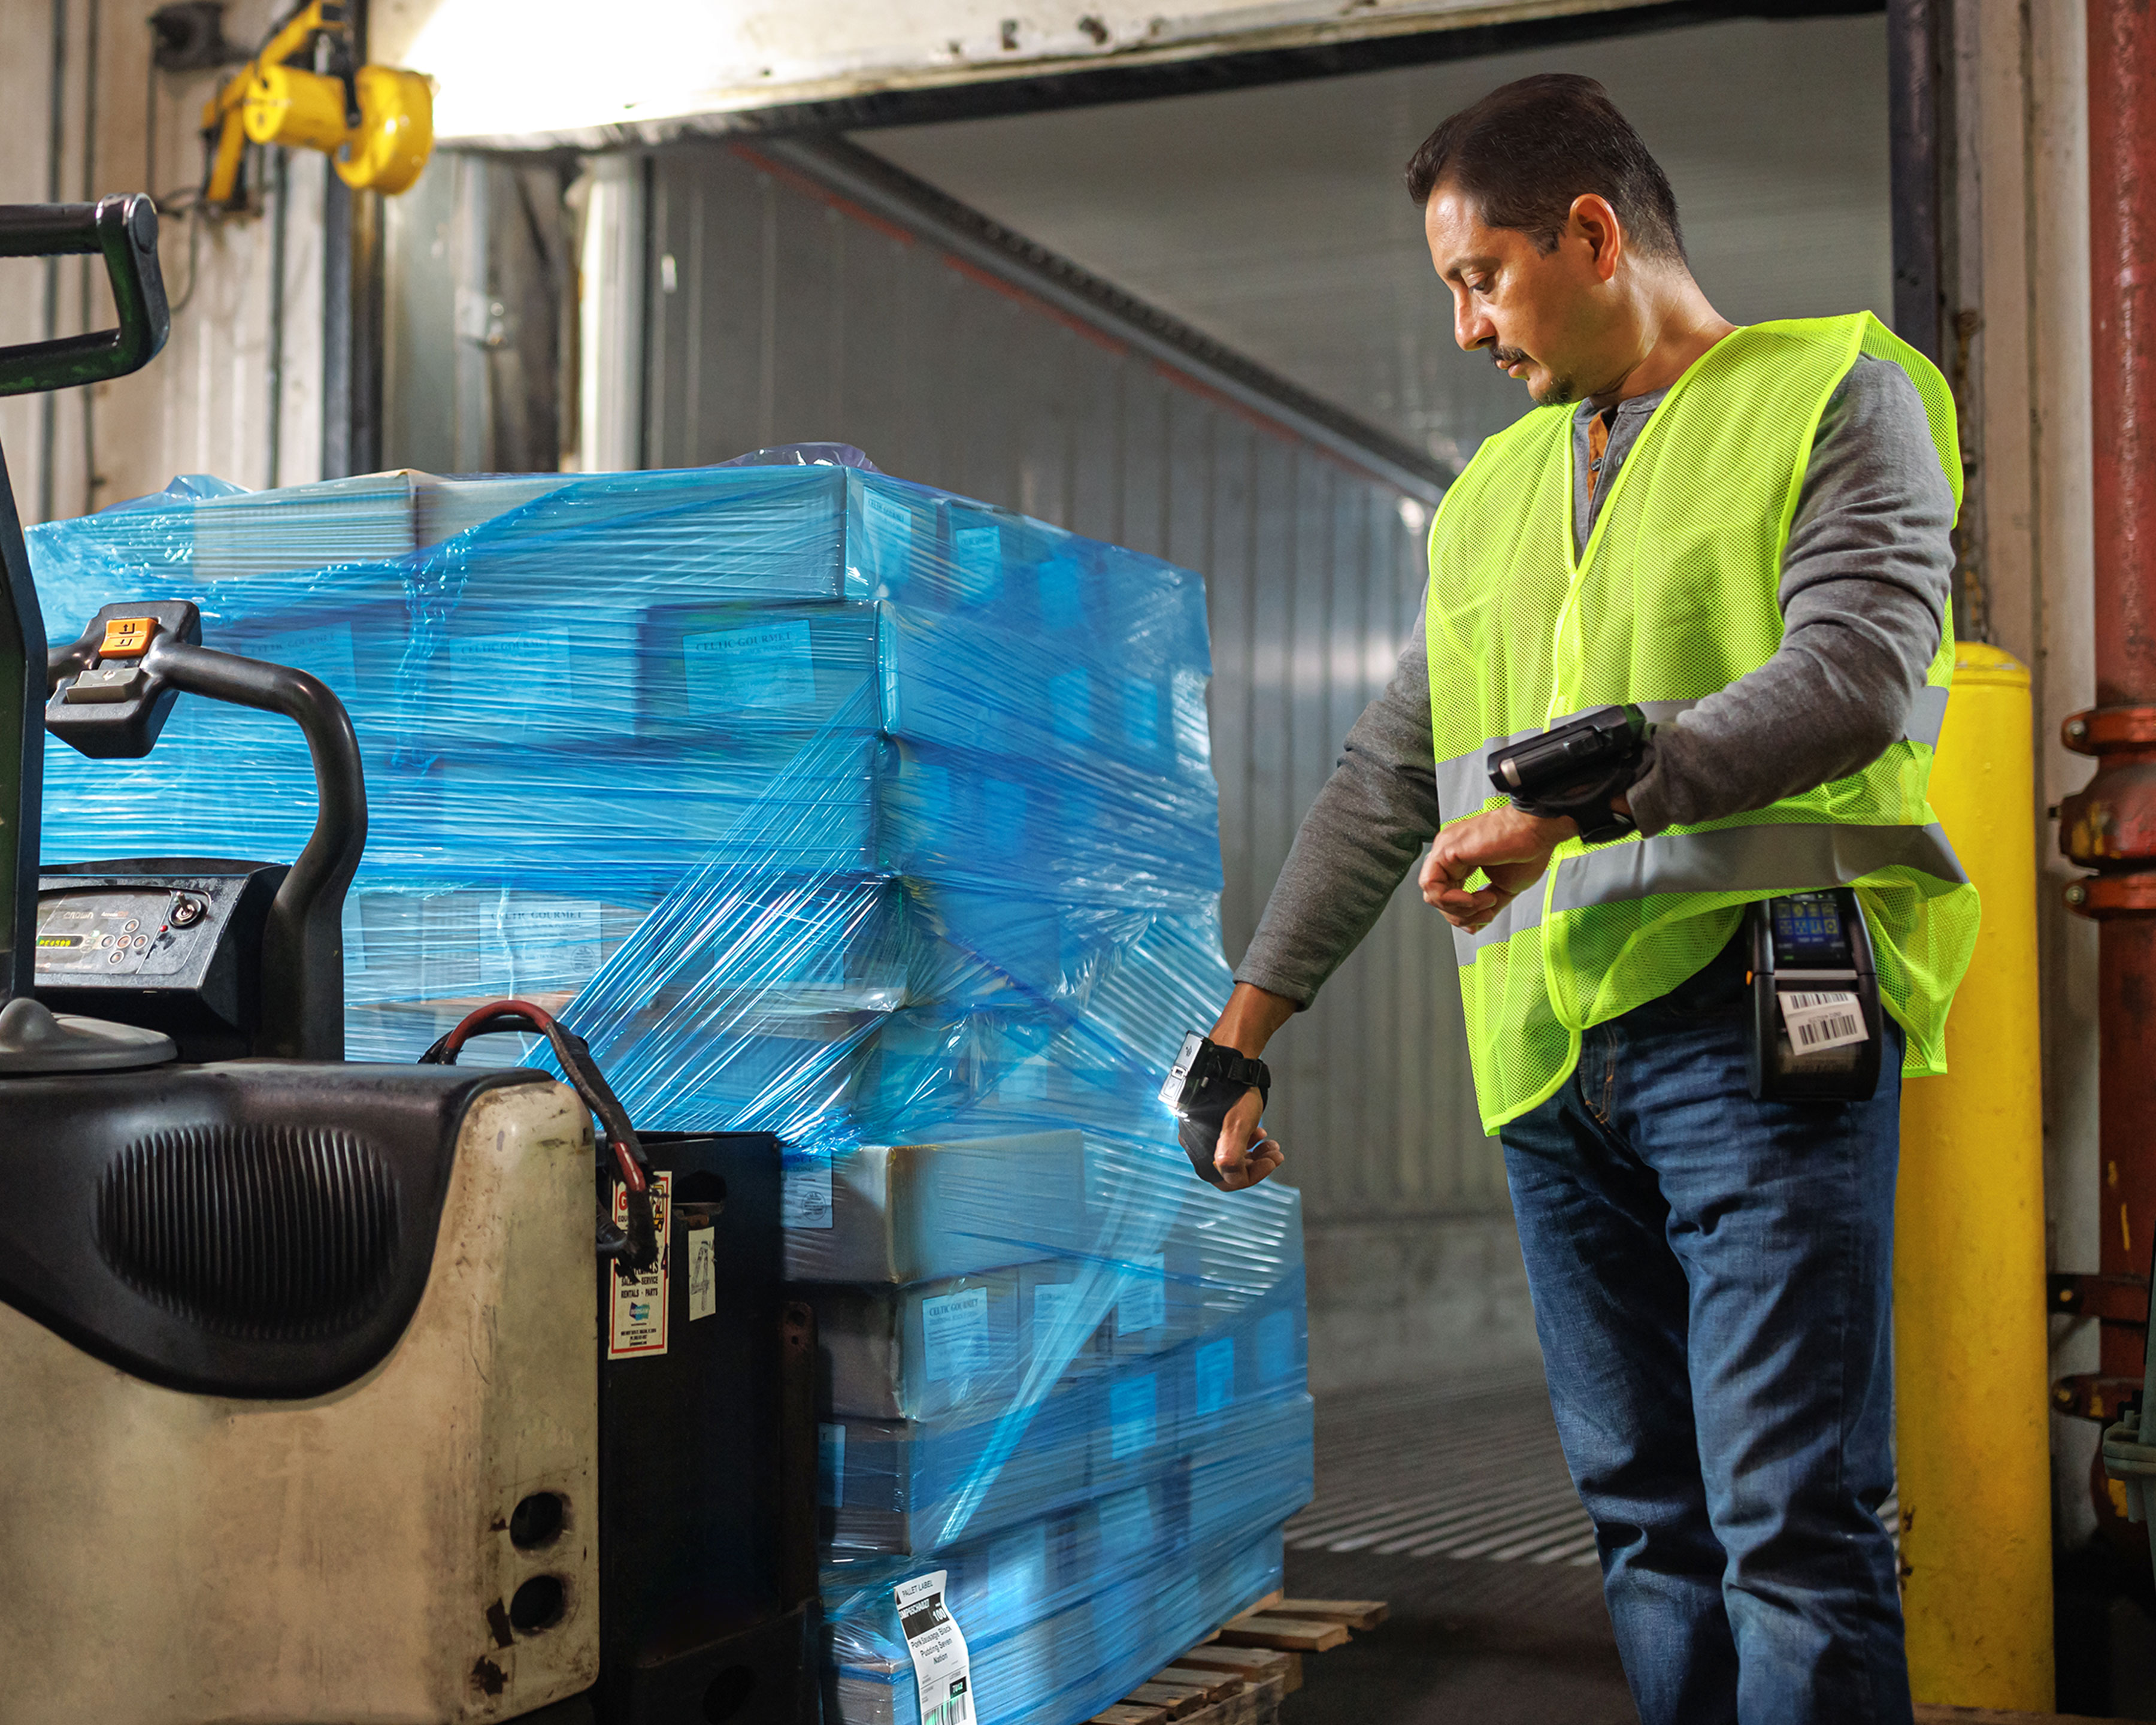 RS6100 Back-of-Hand Mount Loading Barcode Scanning - Warehouse Application Hero Image 5x4 3600